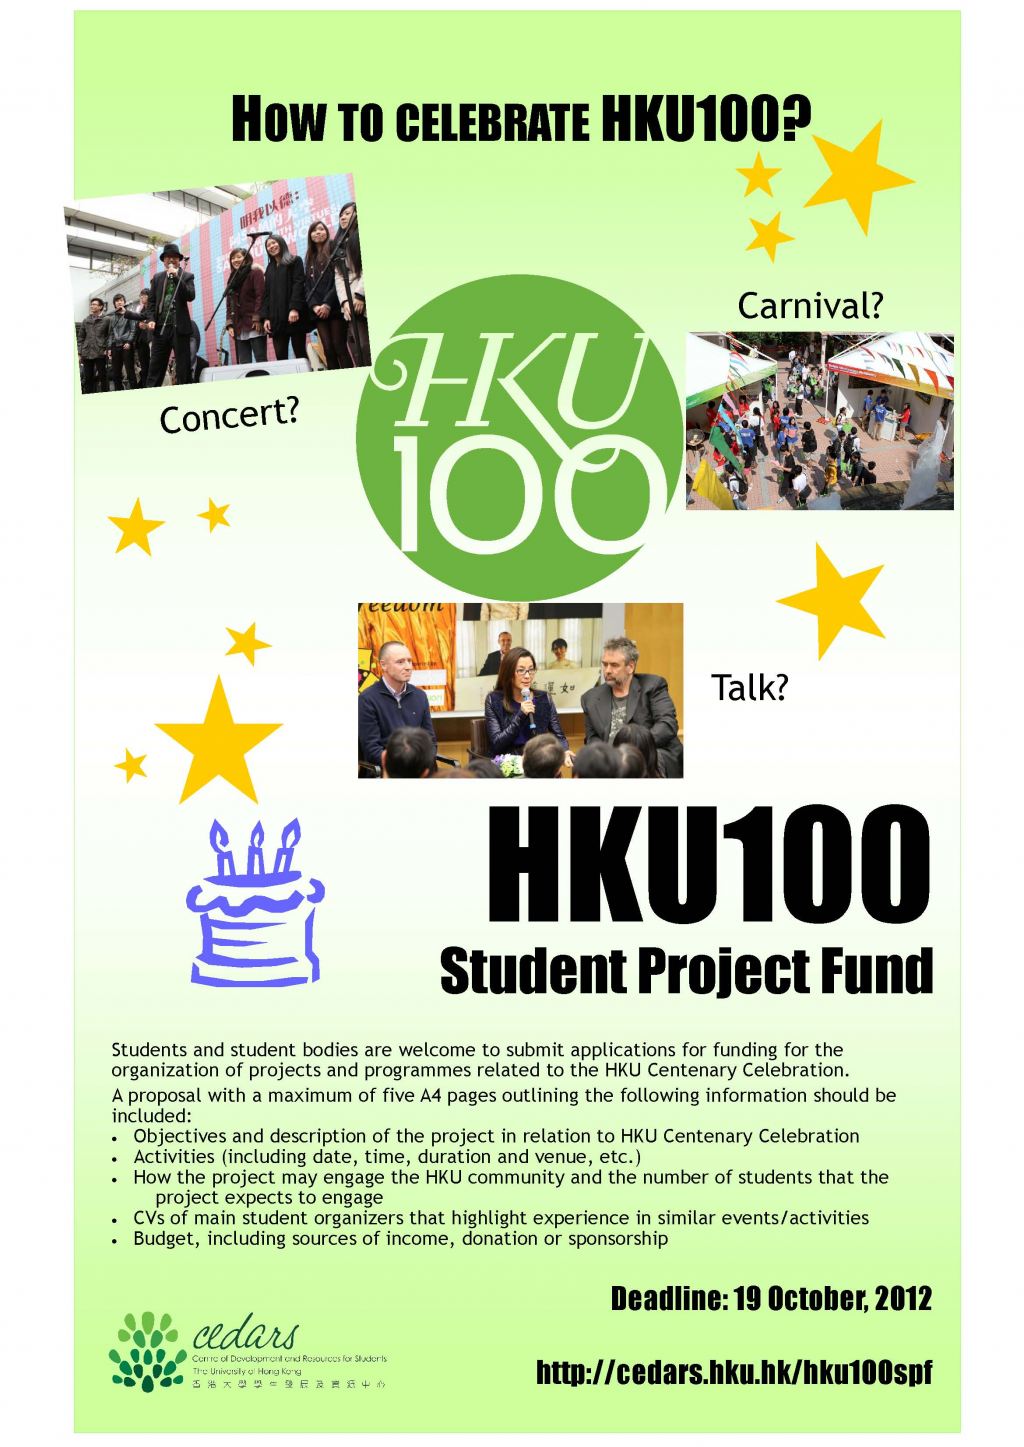 HKU100 Student Project Fund 